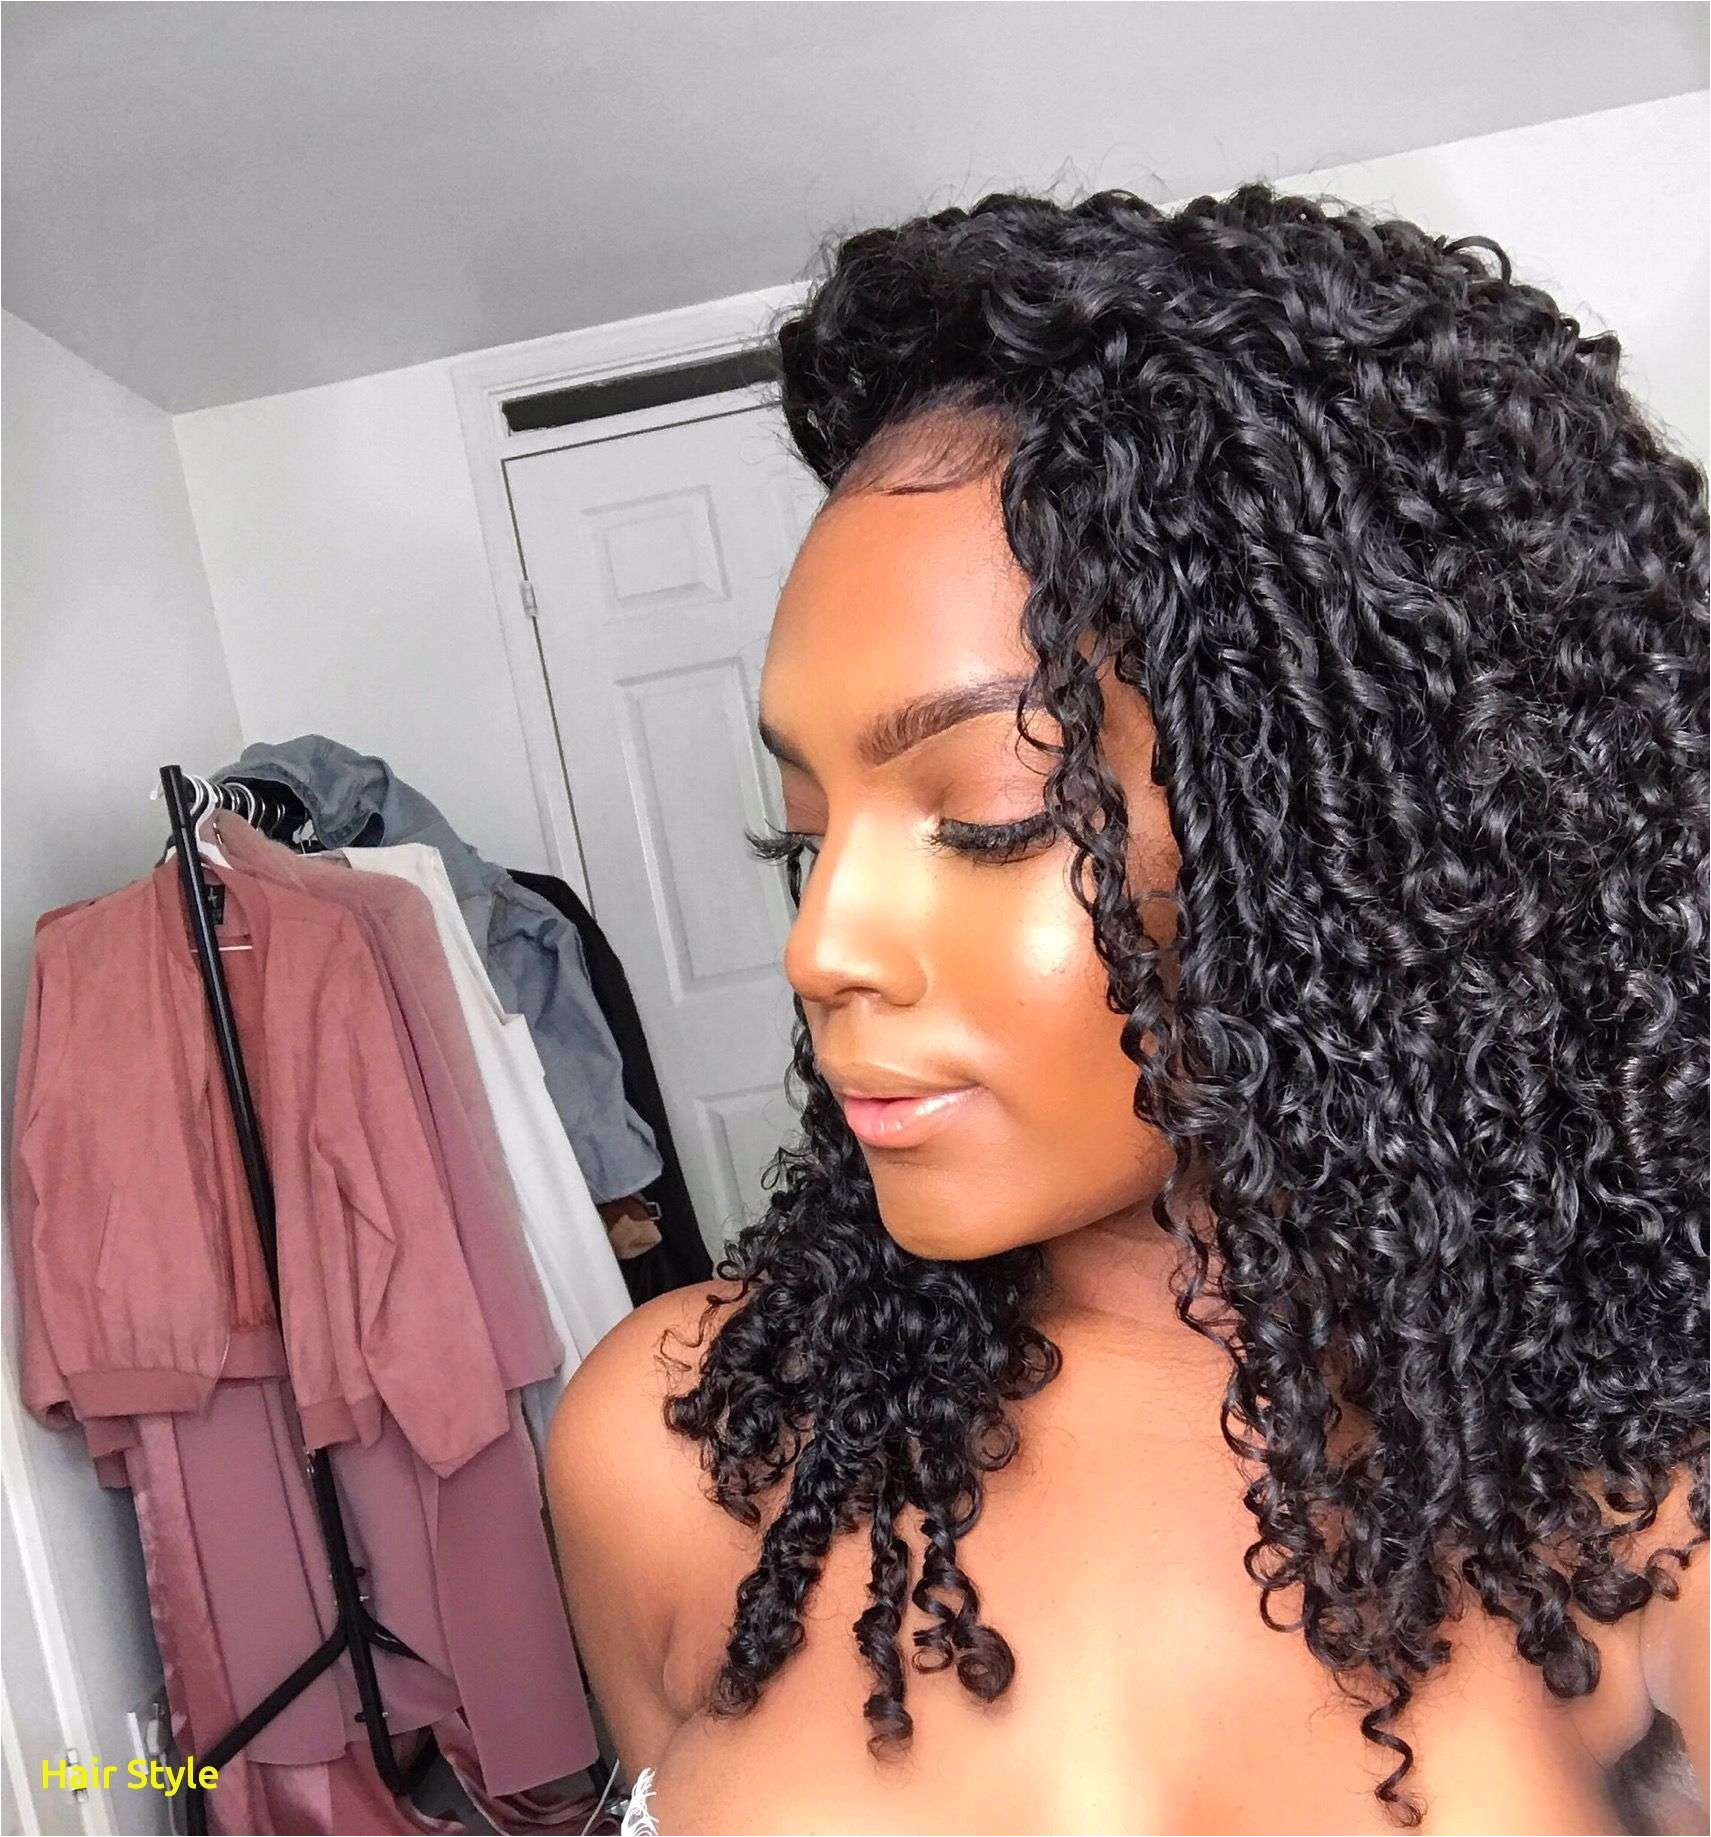 Hairstyles for Curly Black Girl Hair Unique African American Curly Hairstyles Beautiful Wedding Hair for